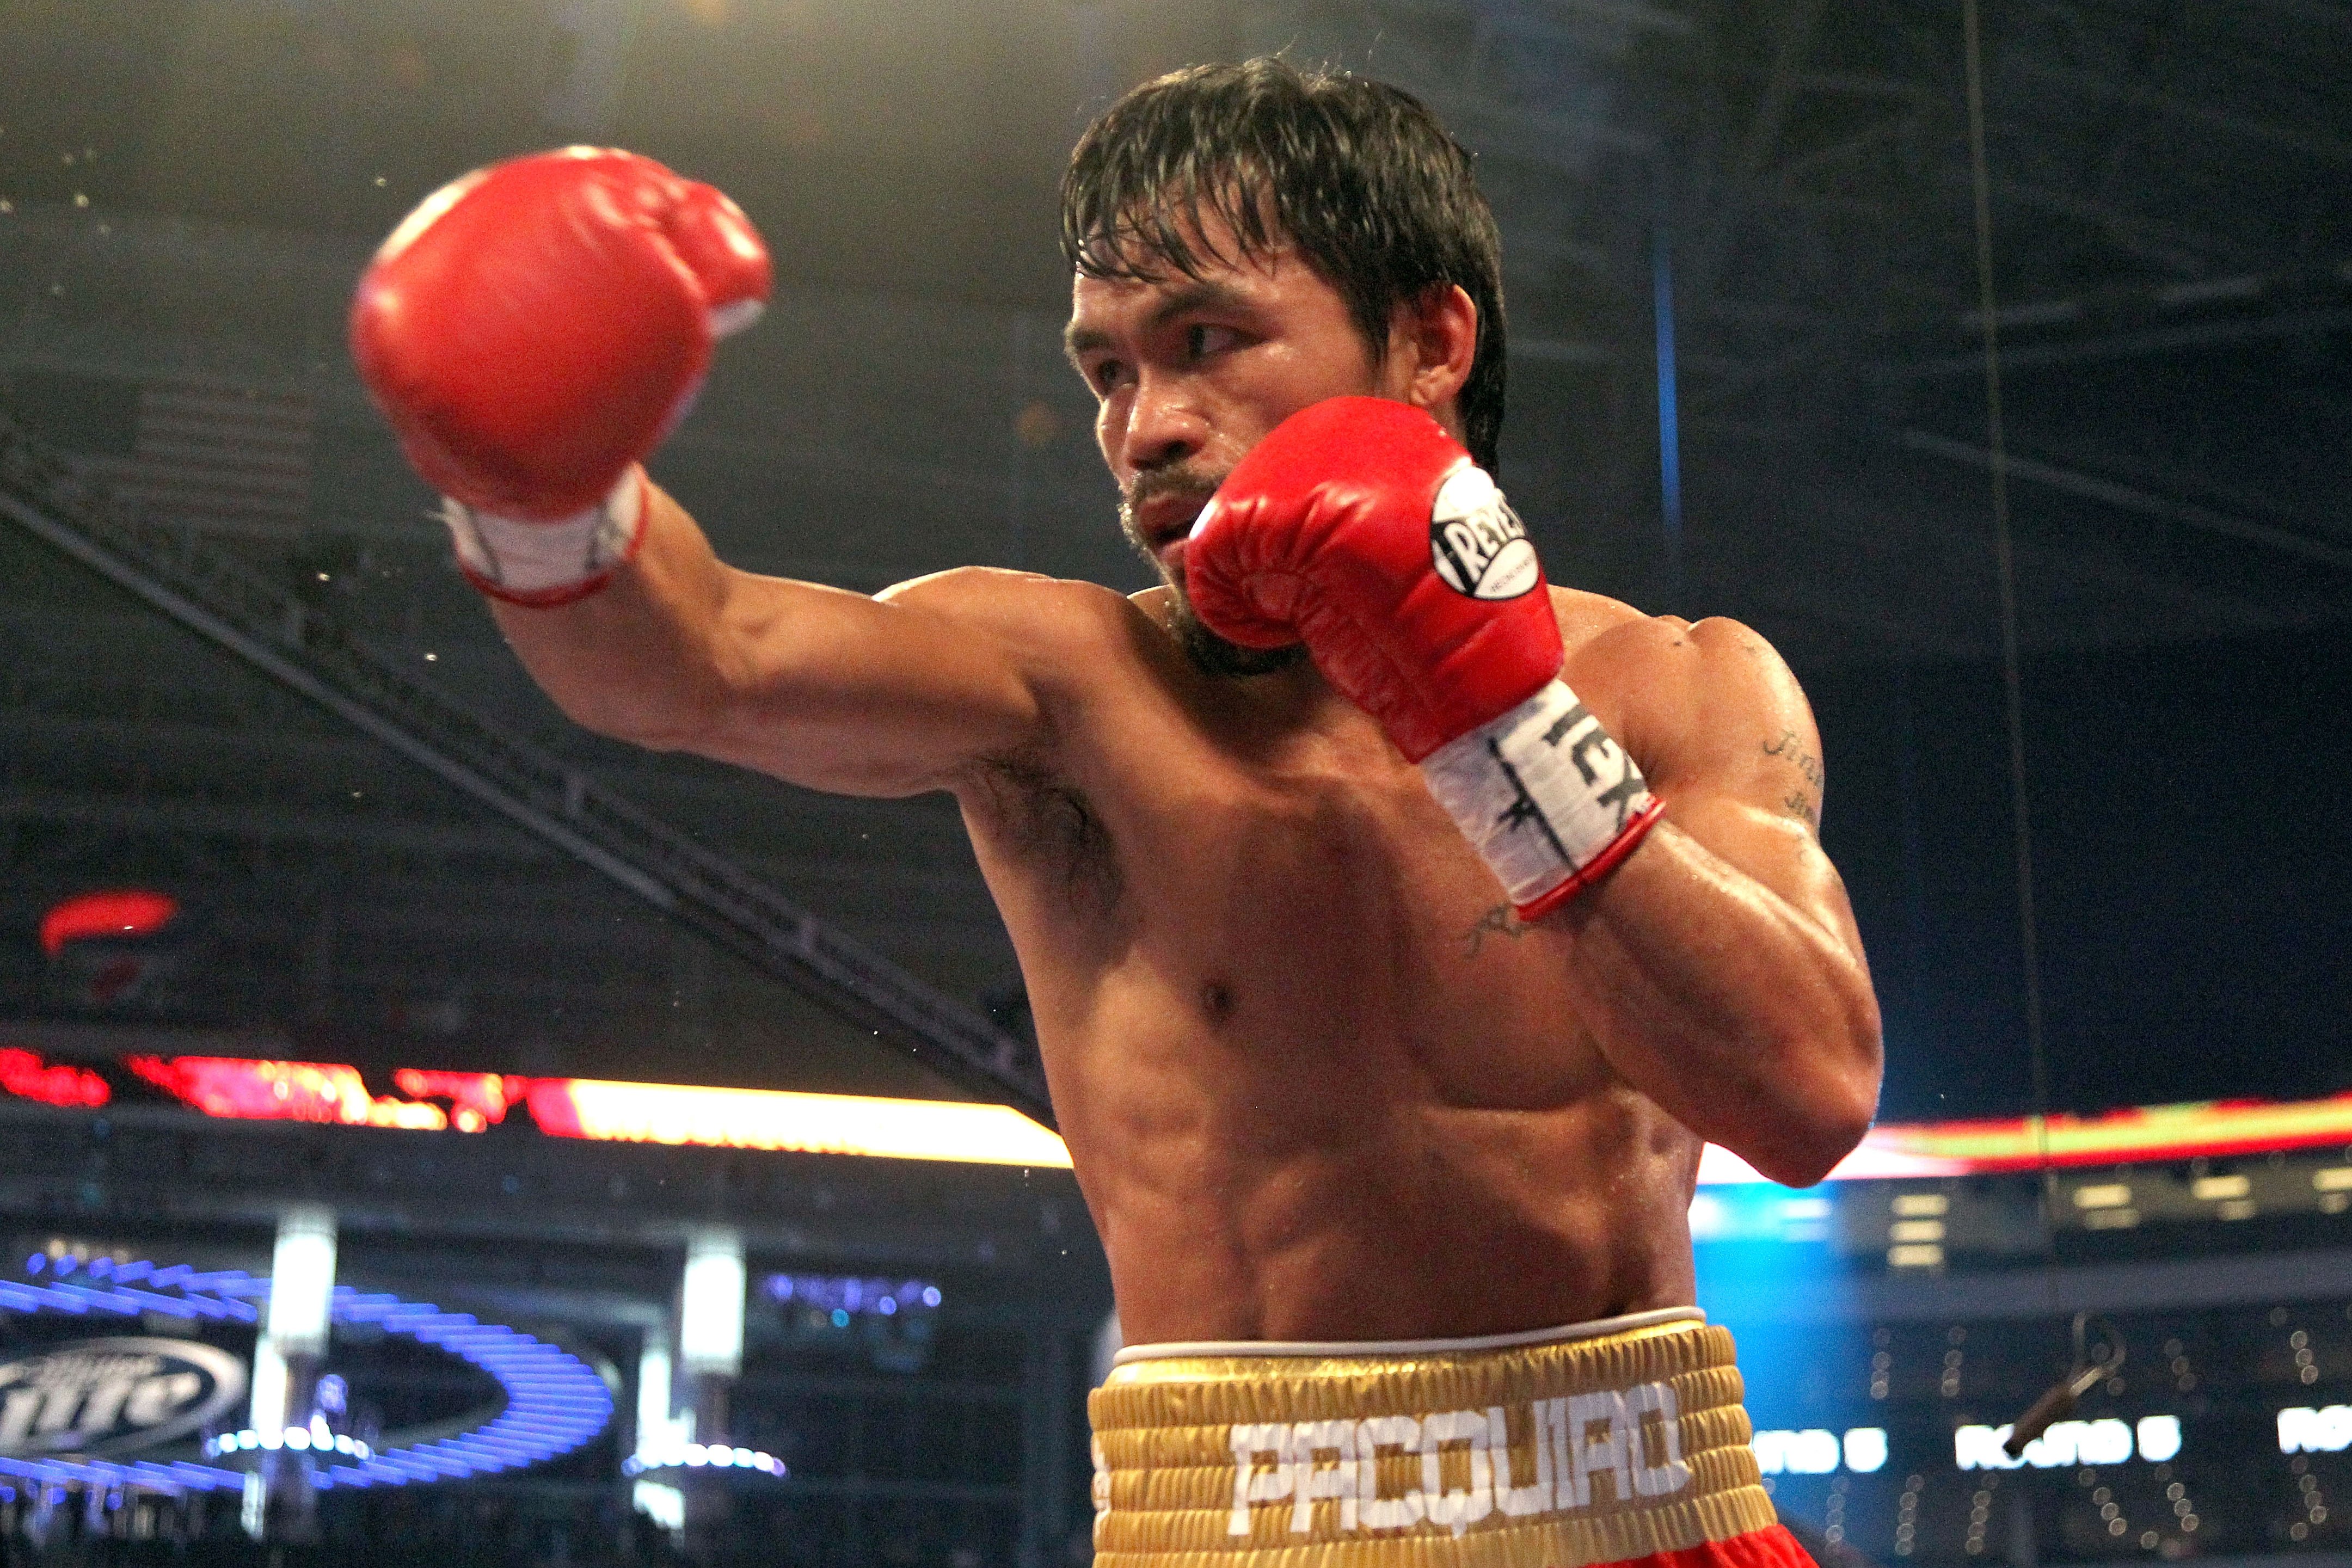 Manny Pacquiao/Antonio Margarito 24/7: 20 Things We Learned From